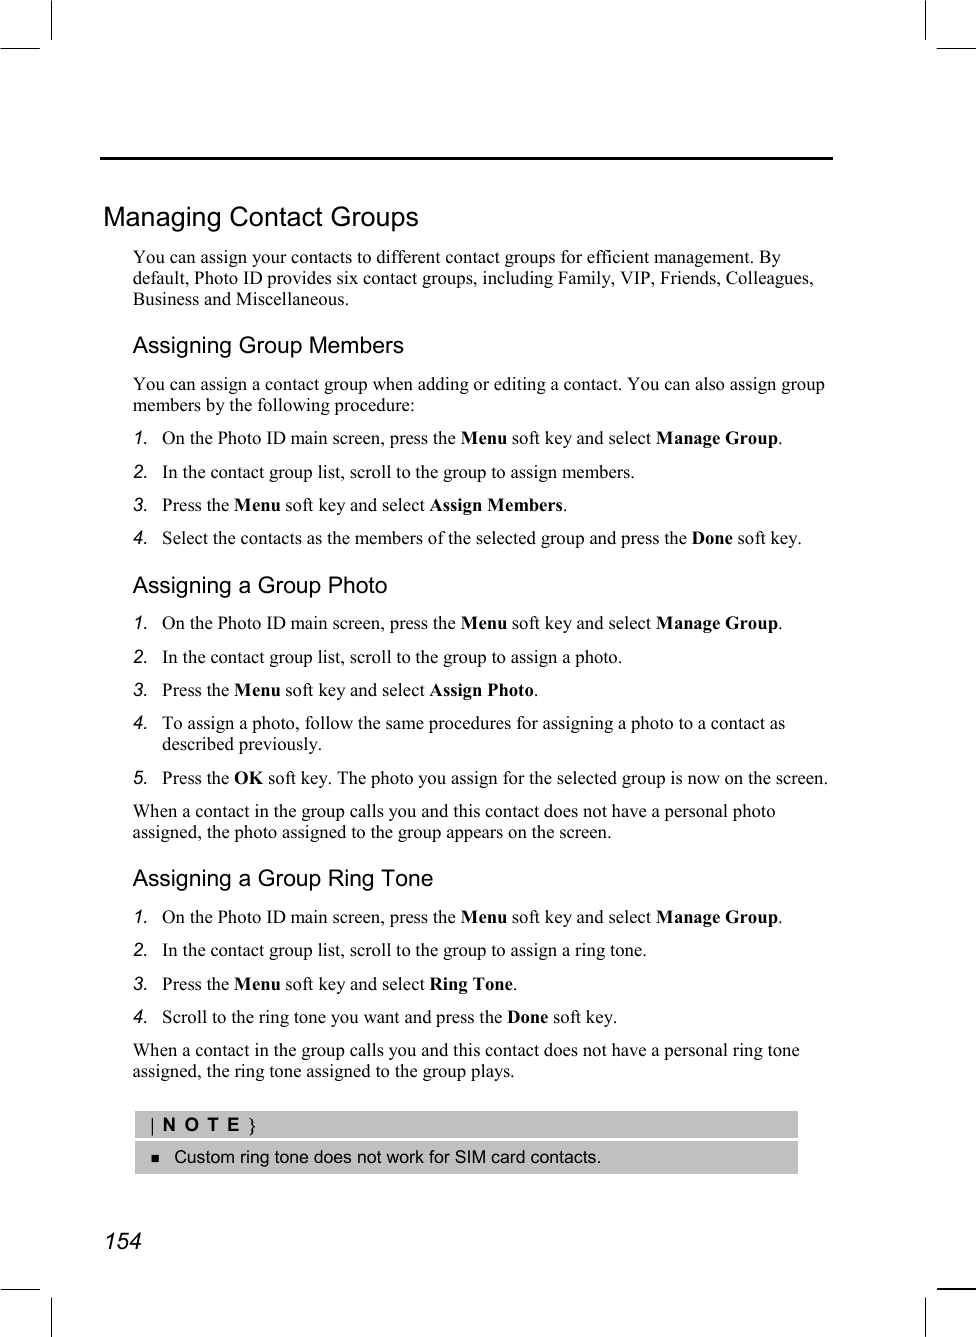  154  Managing Contact Groups You can assign your contacts to different contact groups for efficient management. By default, Photo ID provides six contact groups, including Family, VIP, Friends, Colleagues, Business and Miscellaneous. Assigning Group Members You can assign a contact group when adding or editing a contact. You can also assign group members by the following procedure: 1.  On the Photo ID main screen, press the Menu soft key and select Manage Group. 2.  In the contact group list, scroll to the group to assign members. 3.  Press the Menu soft key and select Assign Members. 4.  Select the contacts as the members of the selected group and press the Done soft key. Assigning a Group Photo 1.  On the Photo ID main screen, press the Menu soft key and select Manage Group. 2.  In the contact group list, scroll to the group to assign a photo. 3.  Press the Menu soft key and select Assign Photo. 4.  To assign a photo, follow the same procedures for assigning a photo to a contact as described previously. 5.  Press the OK soft key. The photo you assign for the selected group is now on the screen. When a contact in the group calls you and this contact does not have a personal photo assigned, the photo assigned to the group appears on the screen. Assigning a Group Ring Tone 1.  On the Photo ID main screen, press the Menu soft key and select Manage Group. 2.  In the contact group list, scroll to the group to assign a ring tone. 3.  Press the Menu soft key and select Ring Tone. 4.  Scroll to the ring tone you want and press the Done soft key. When a contact in the group calls you and this contact does not have a personal ring tone assigned, the ring tone assigned to the group plays.  |NOTE}   Custom ring tone does not work for SIM card contacts.  